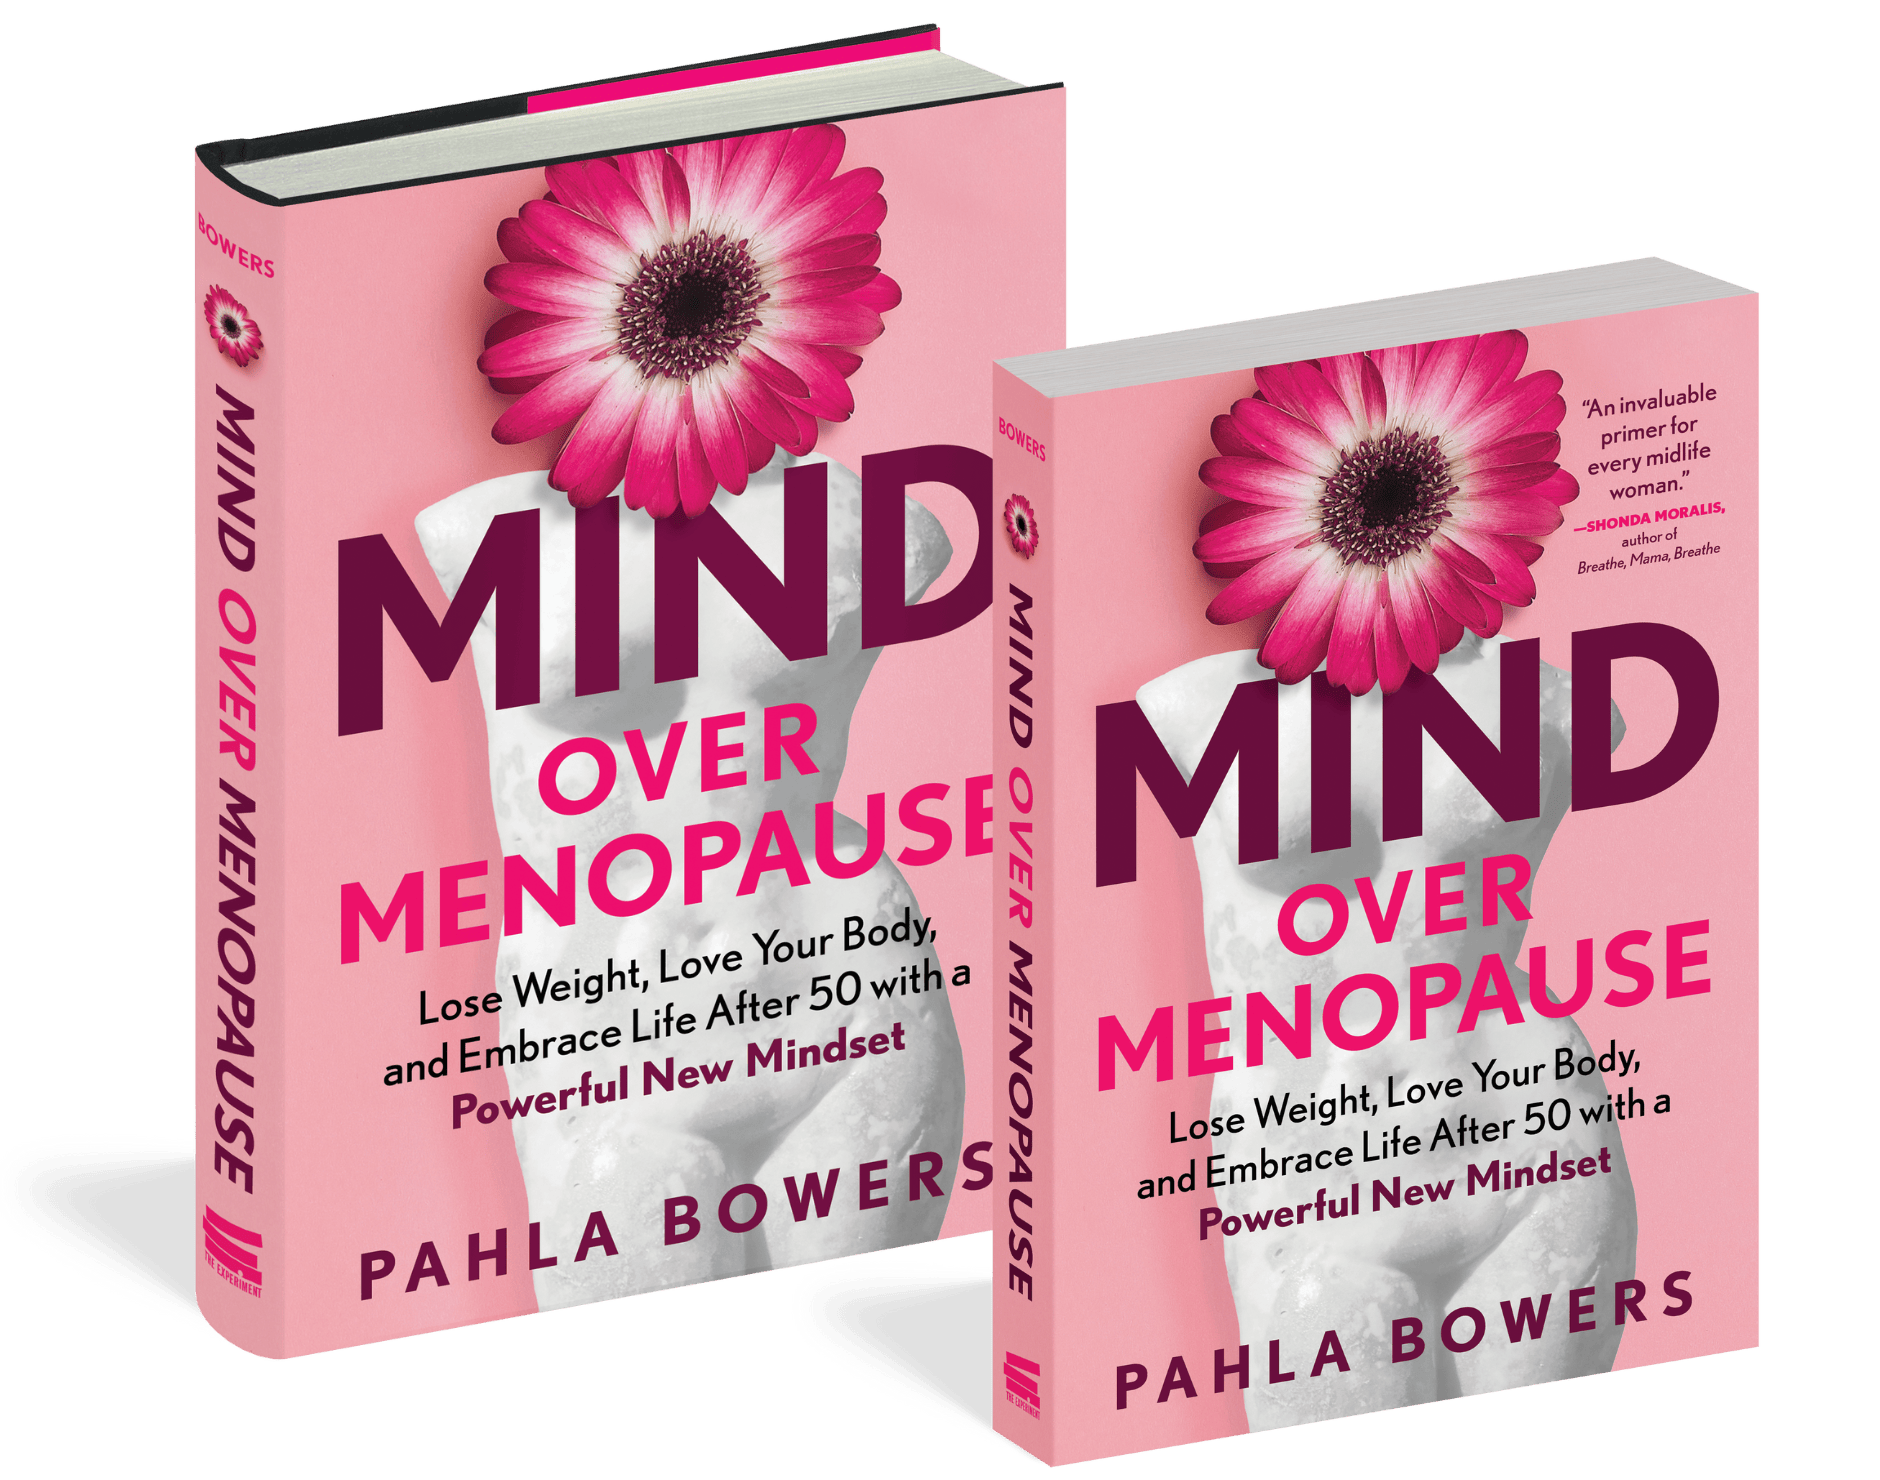 Mind Over Menopause by Pahla Bowers